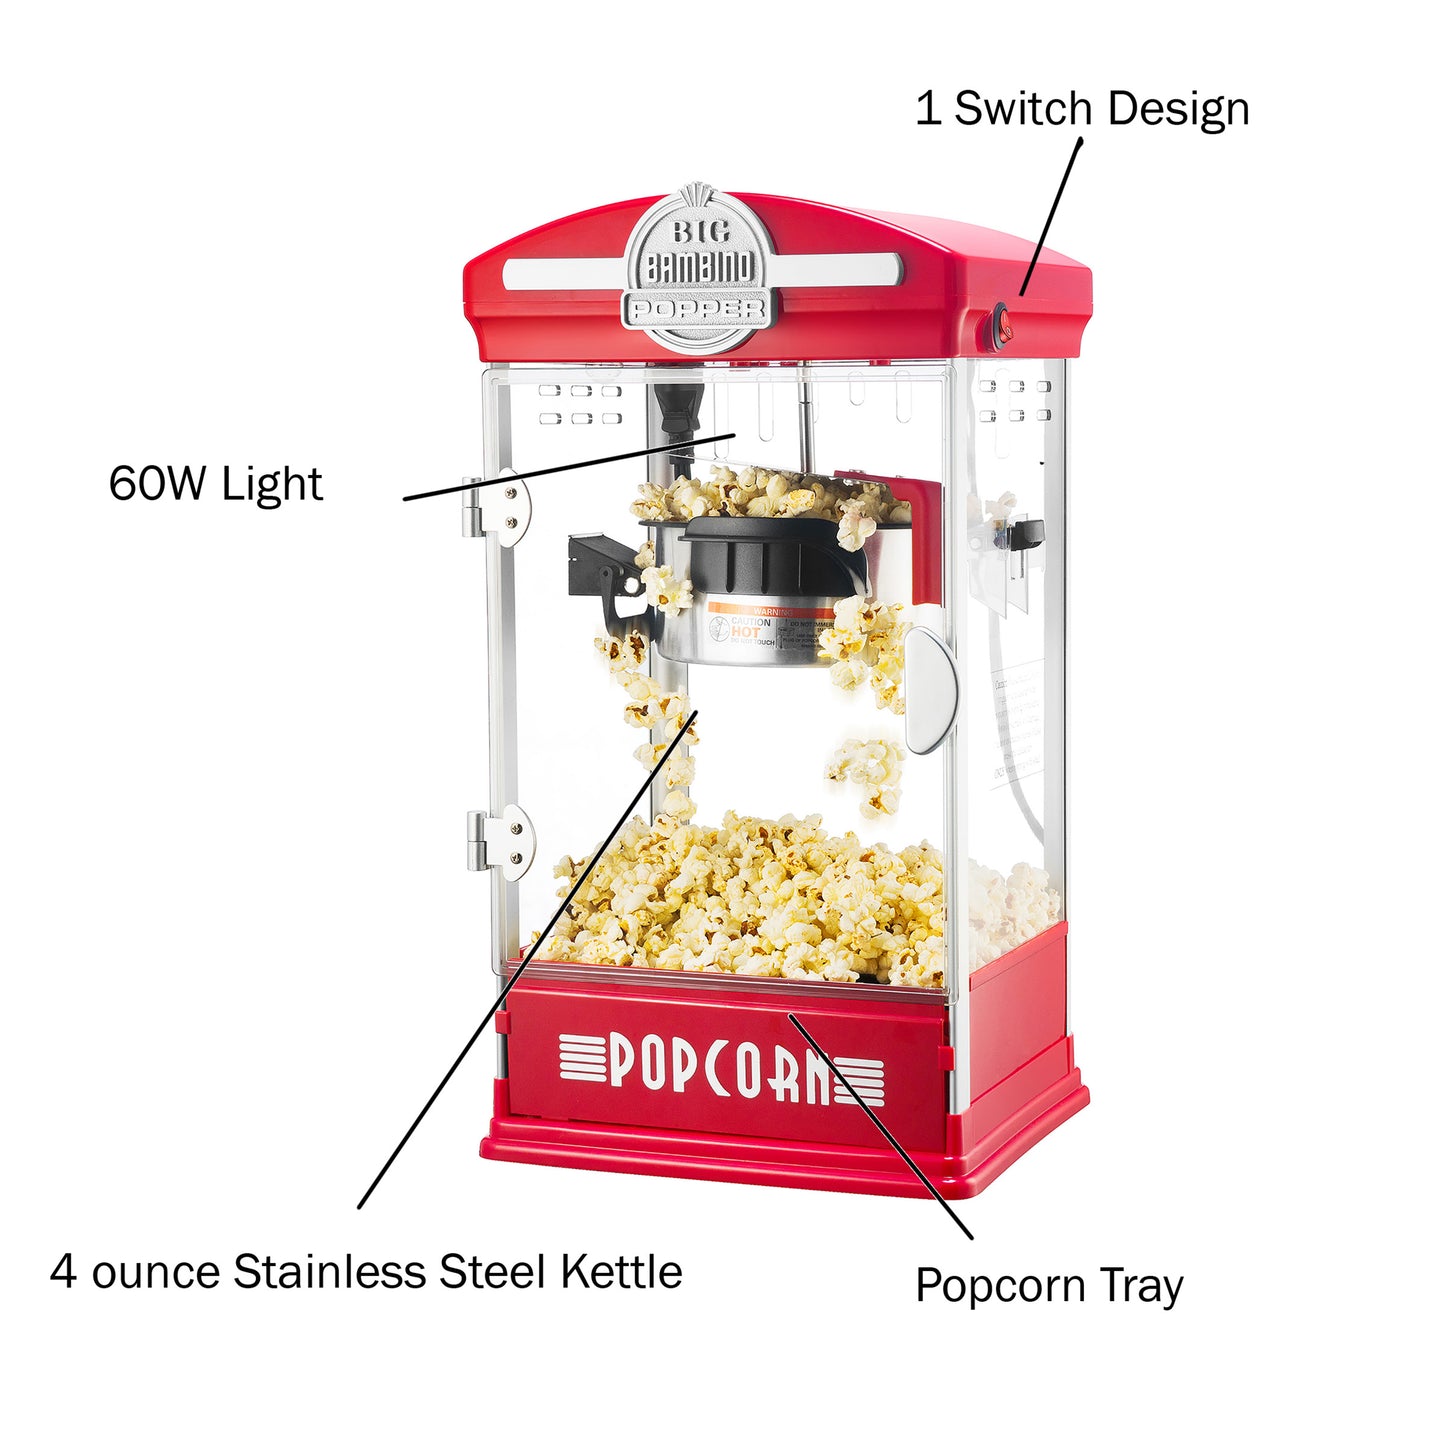 Big Bambino Countertop Popcorn Machine with 4 Ounce Kettle - Red